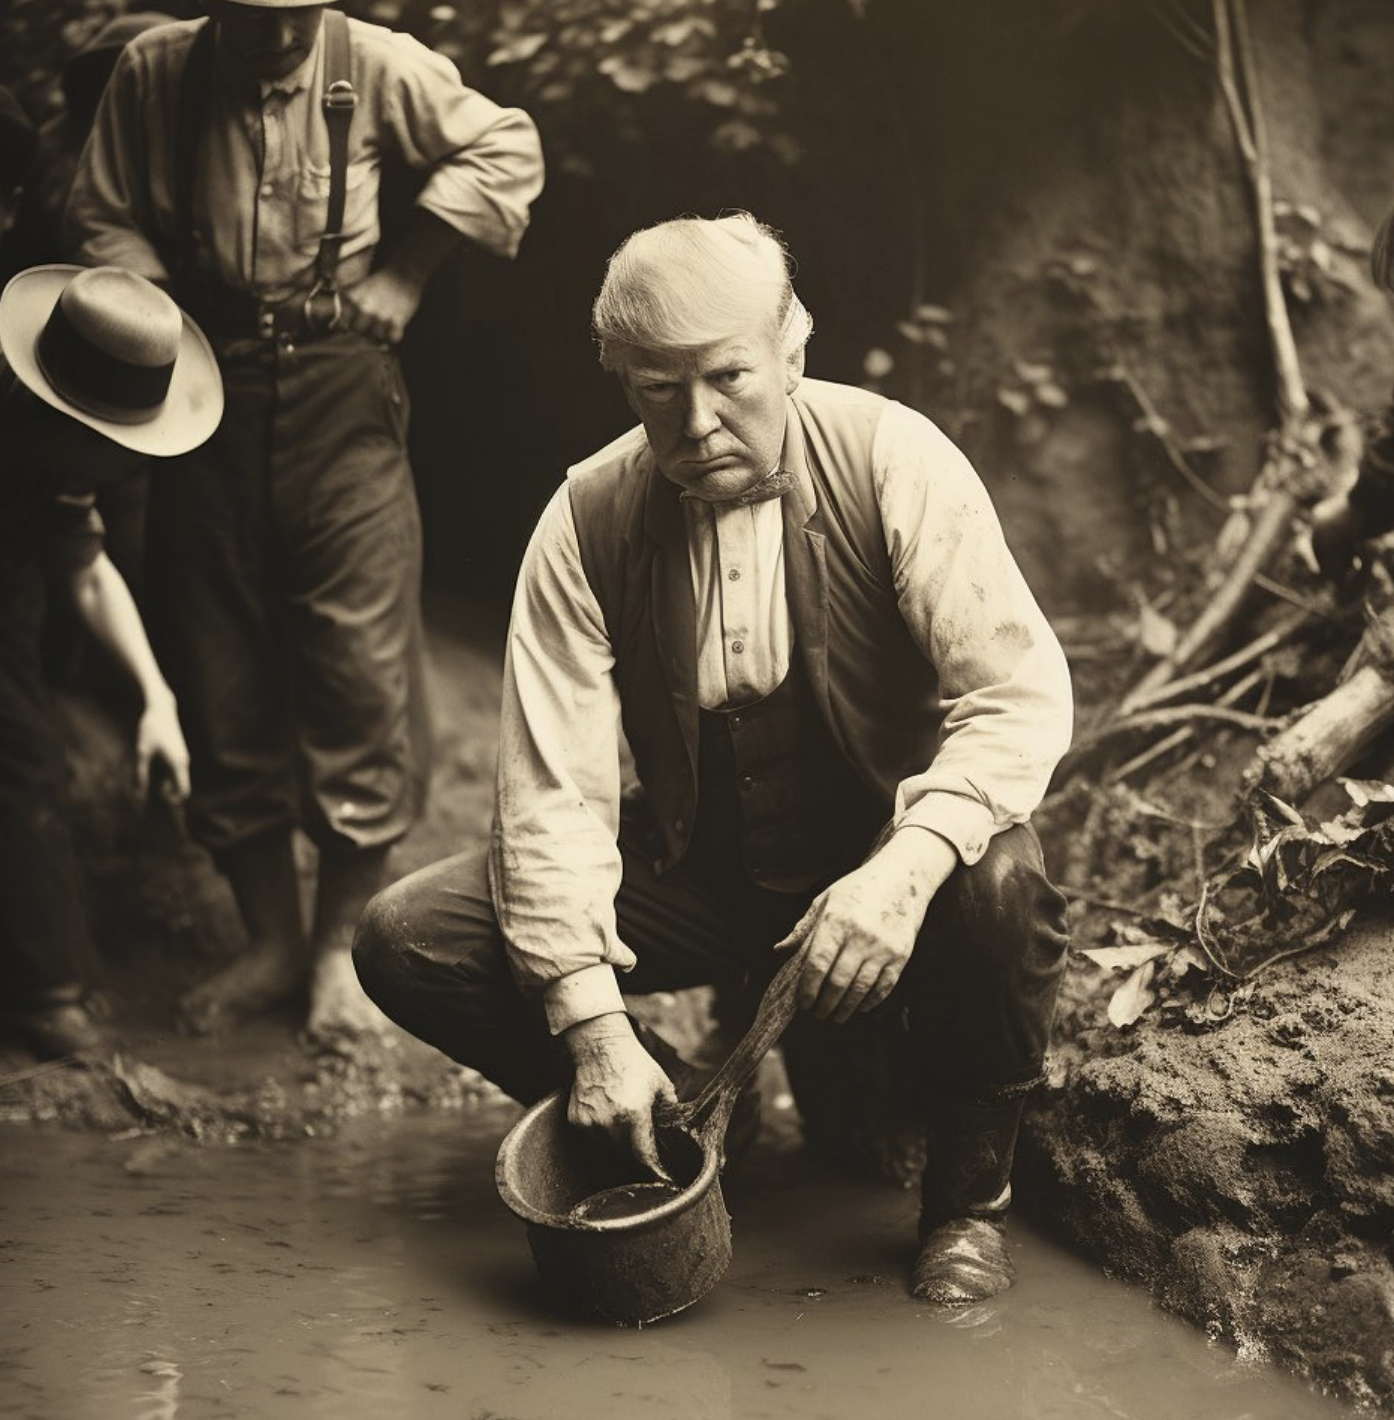 Trump sifting for gold